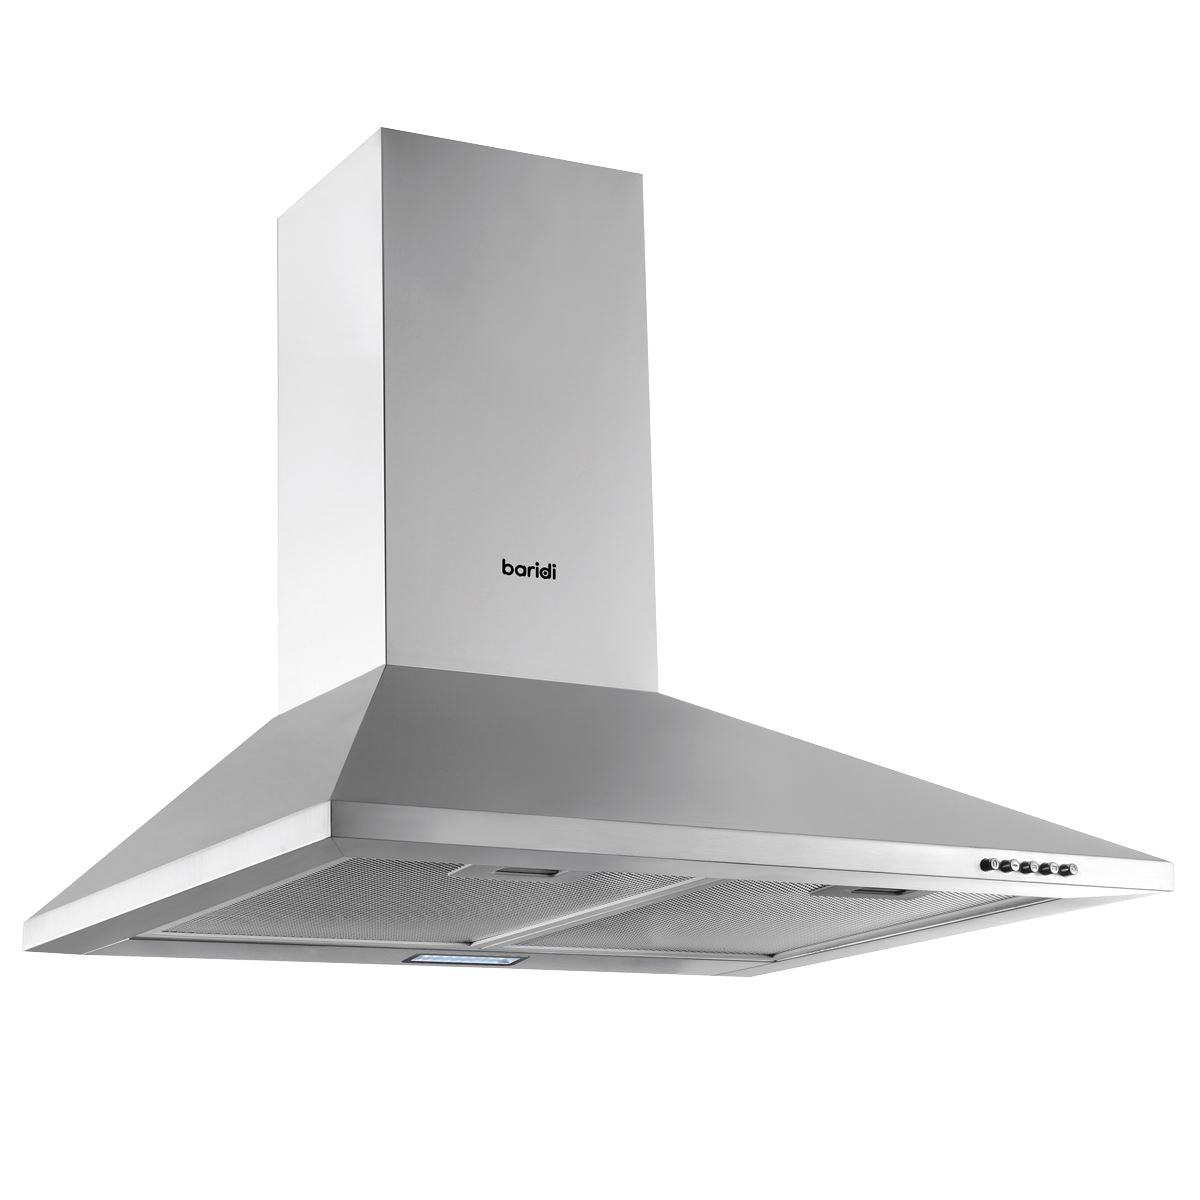 Baridi 60cm Chimney Style Cooker Hood with Carbon Filters, Stainless Steel